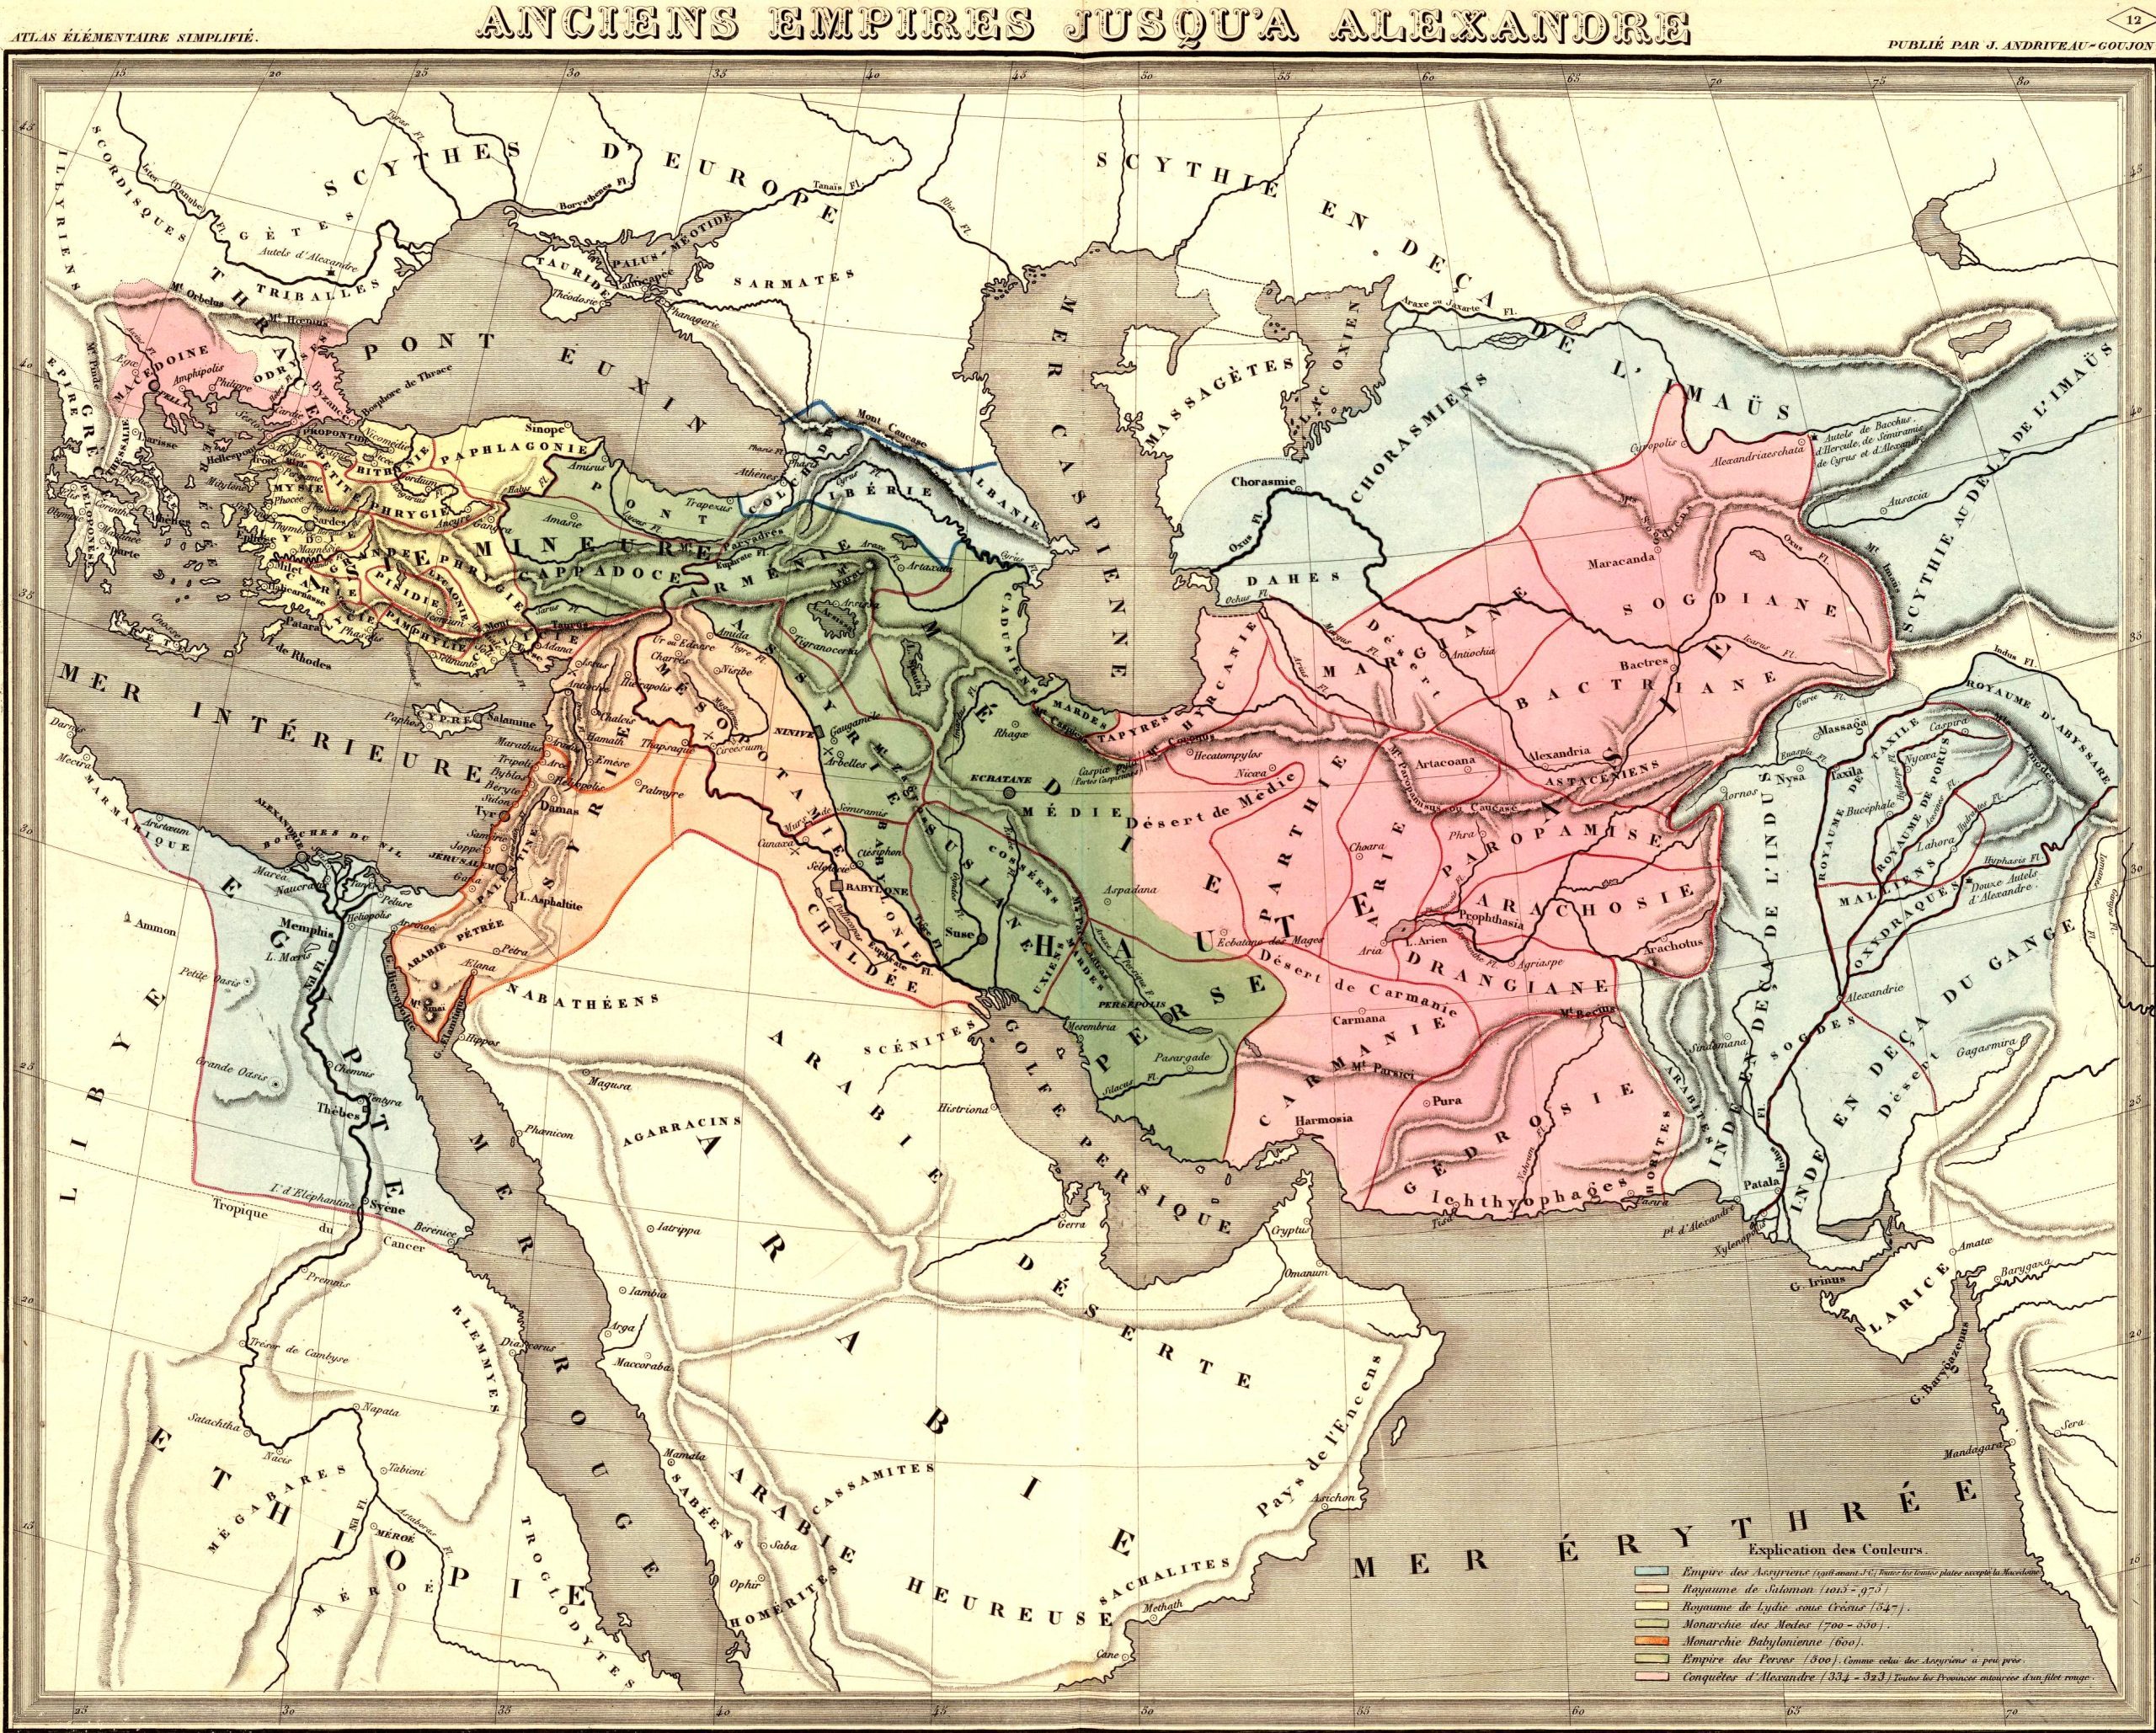 Ancient empires at the time of Alexander the Great